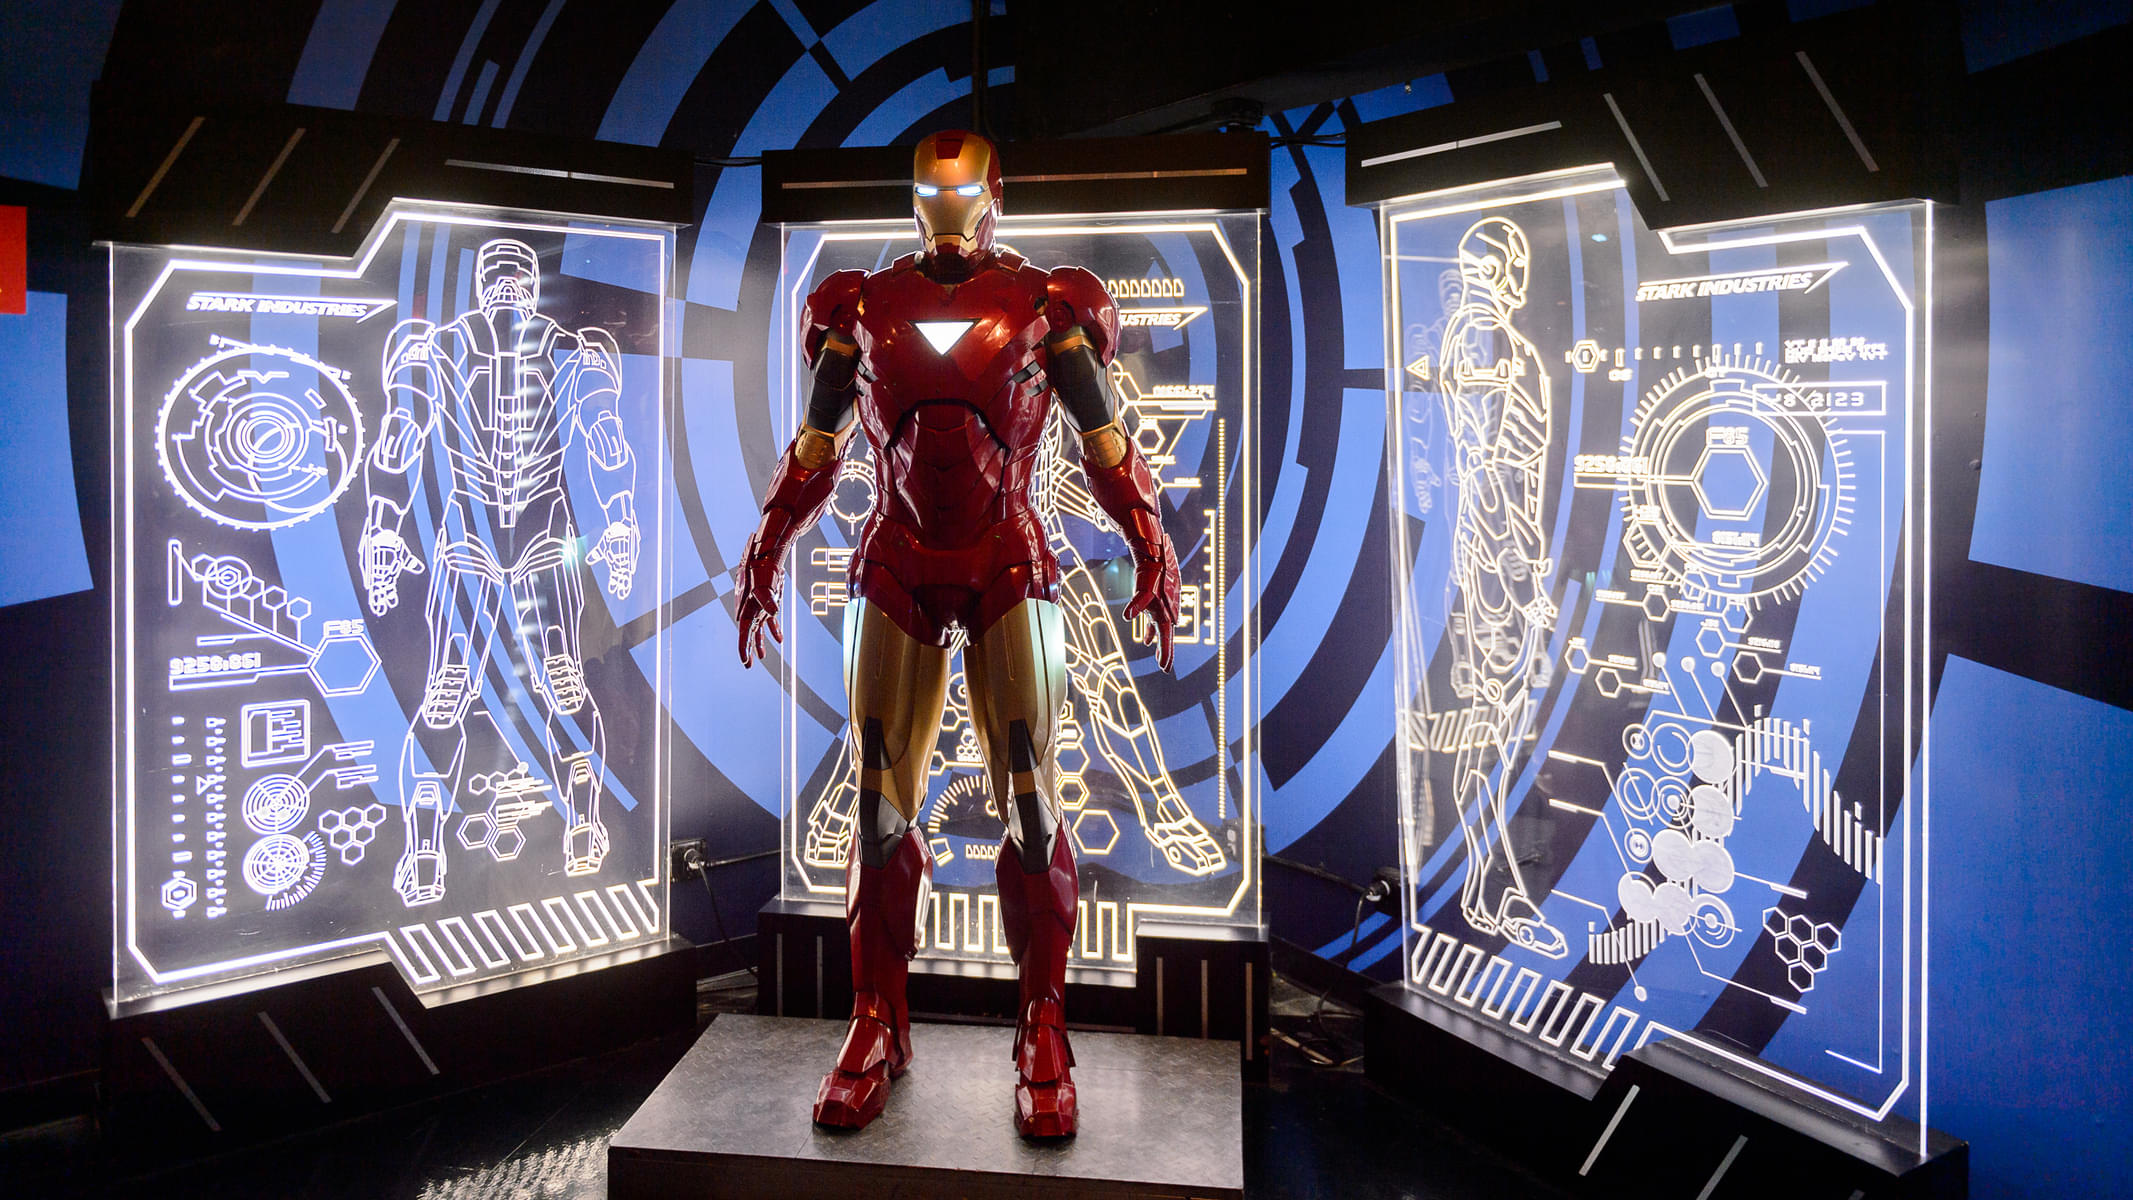 See the amazing replica of the infamous Iron Man suit